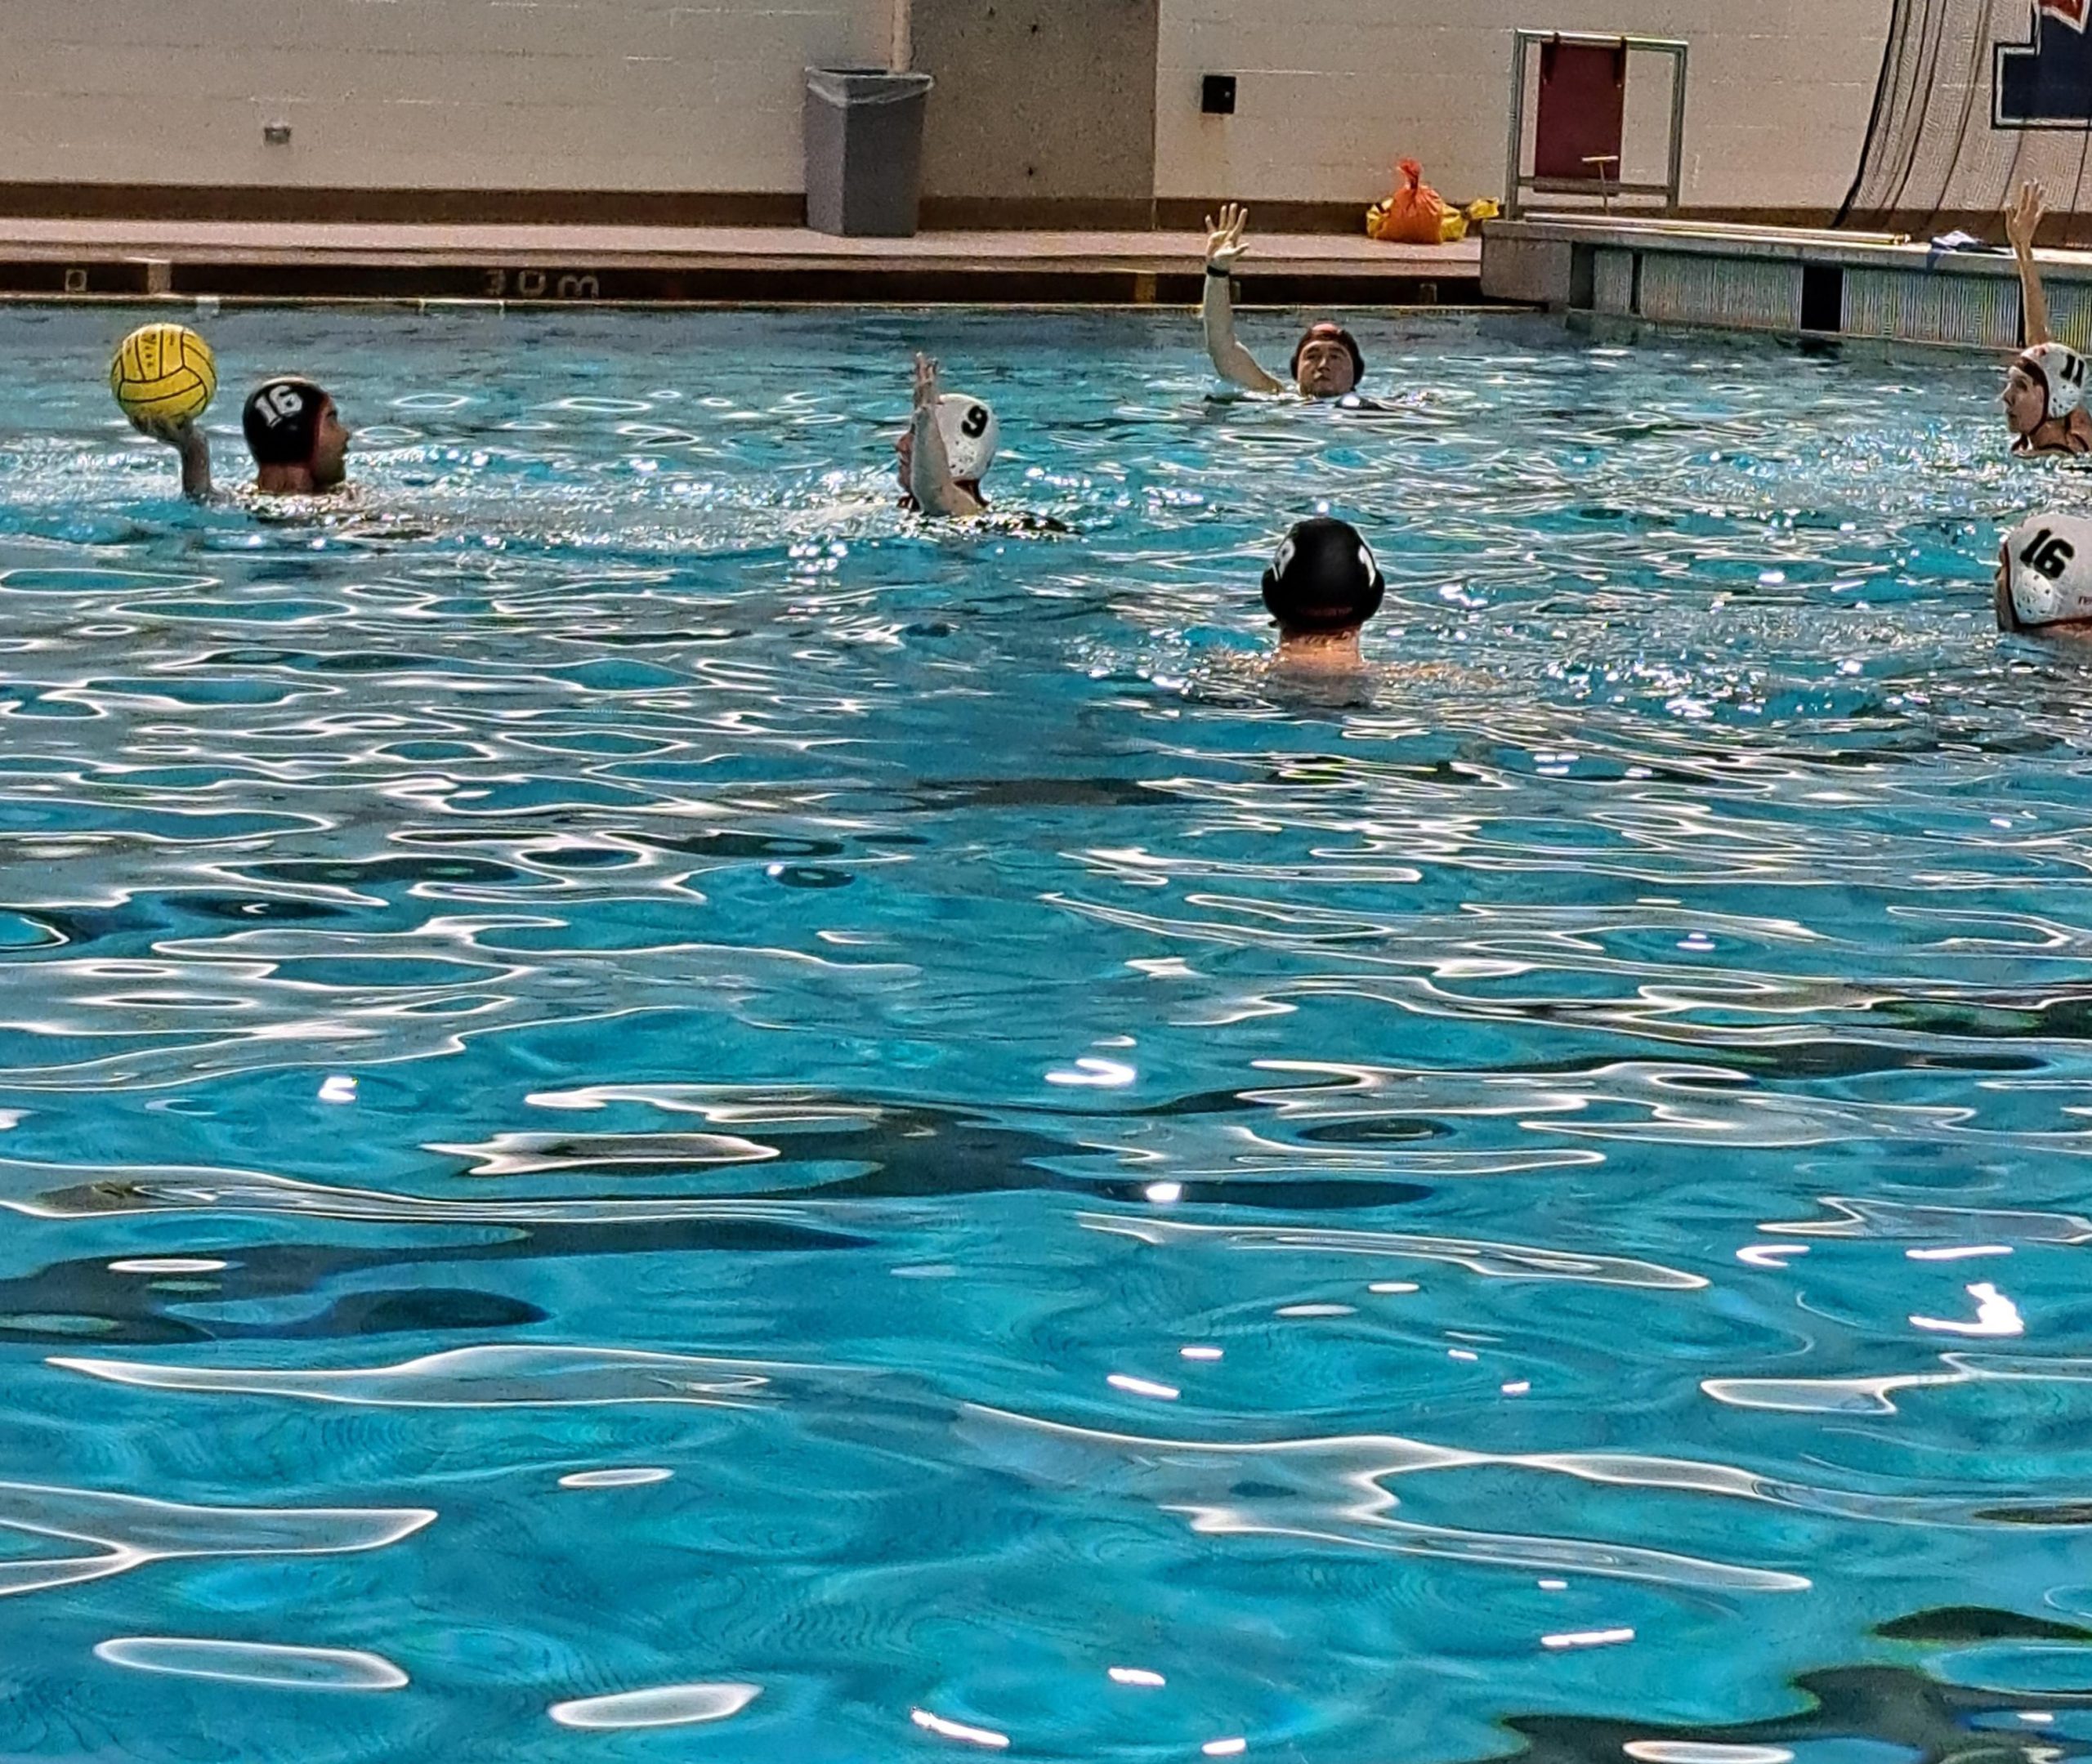 A group of people playing water polo in an indoor pool.